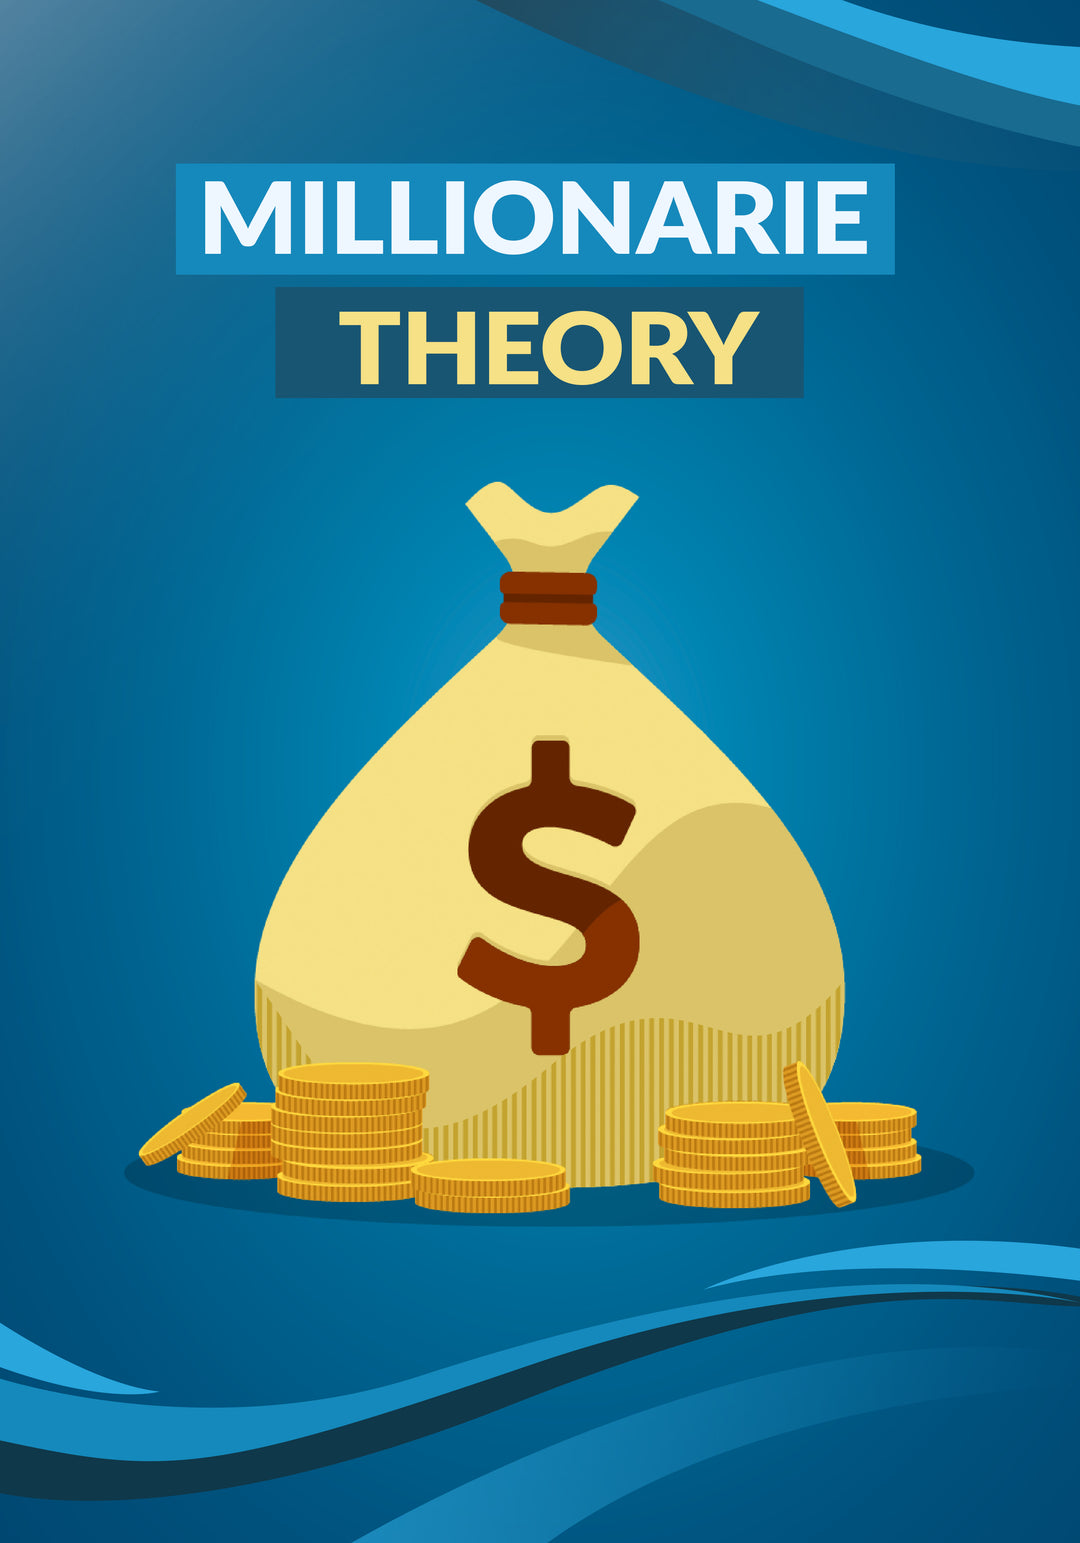 “Millionaire Theory” is a first chance to make money online while doing part-time work from home and working on your mobile and Laptop.